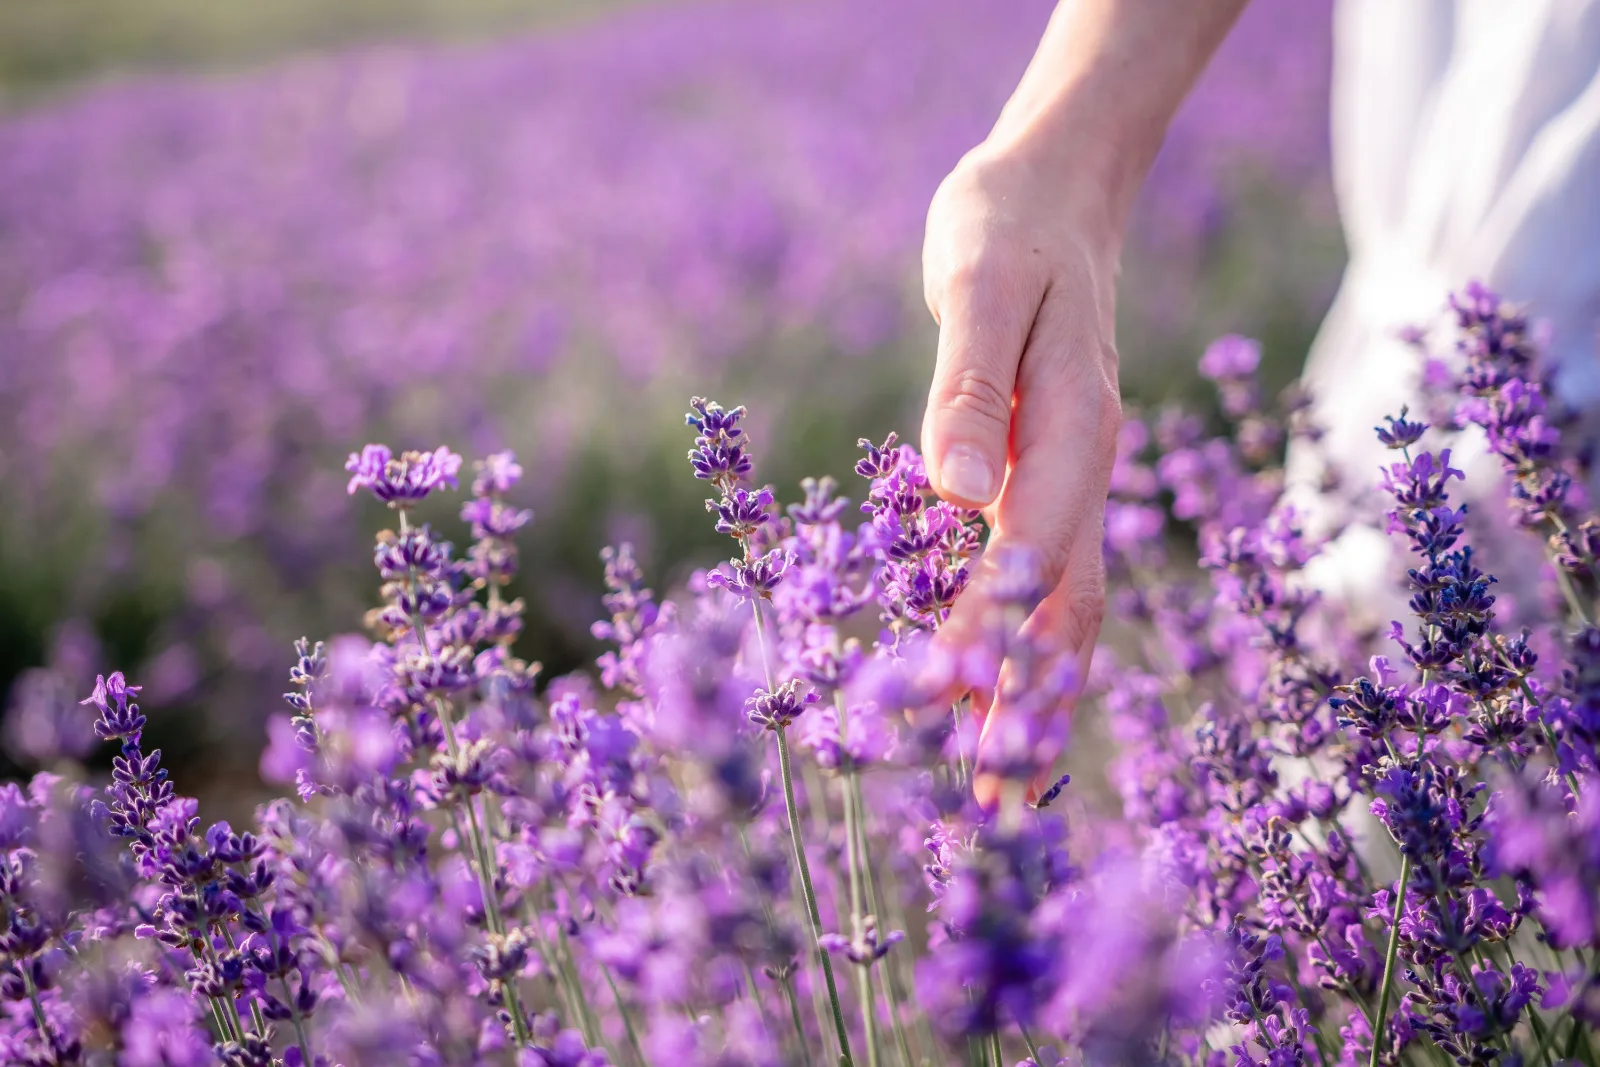 hand of happy young woman in white dress on blooming fragrant lavender fields with endless rows